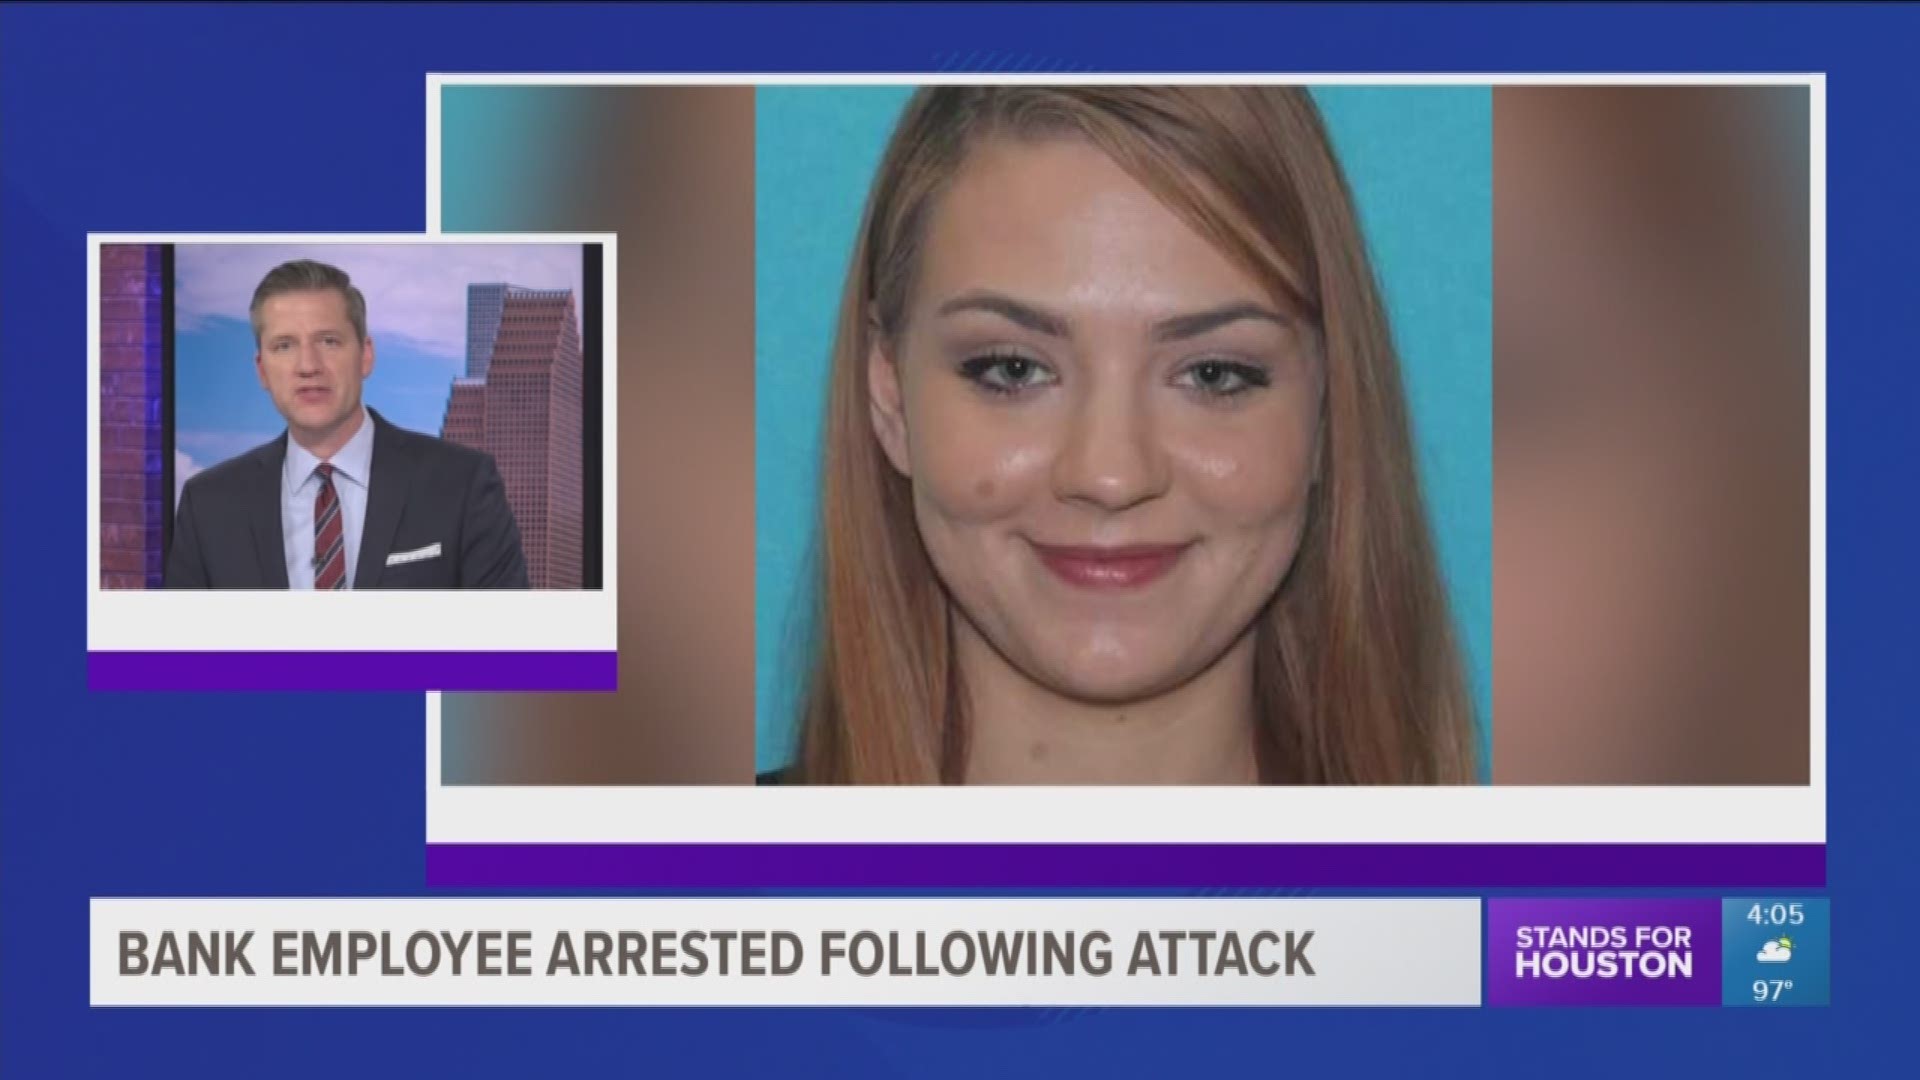 Shelby Taylor Wyse, 25, was arrested and charged with robbery on Tuesday in connection to the violent attack on two business owners in northwest Houston. 